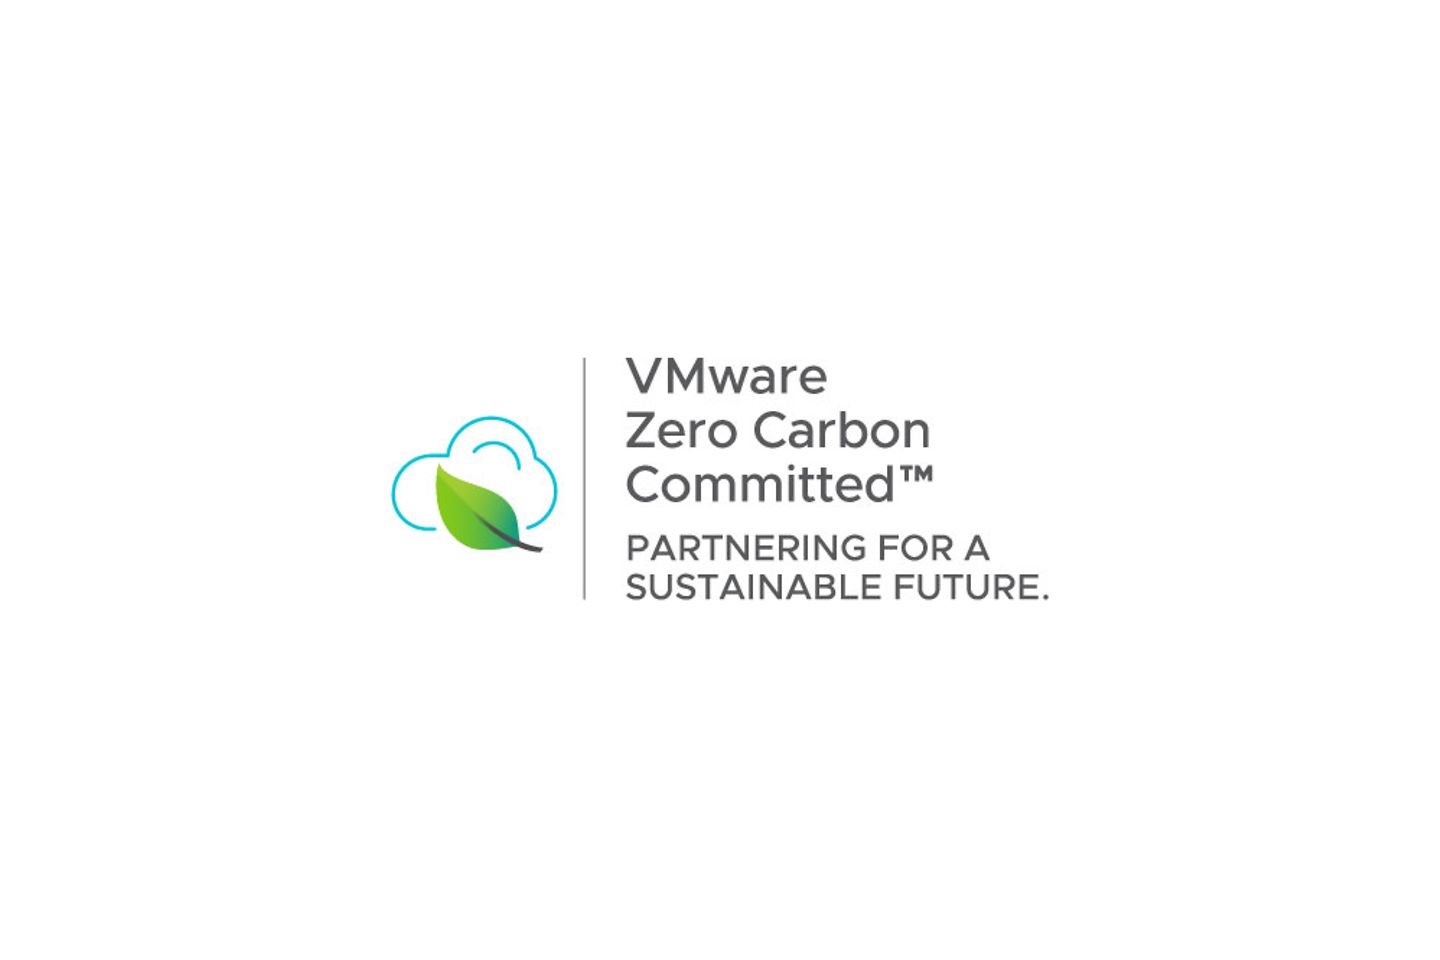 Cloud symbol with a green leaf on top of it and VWware slogan